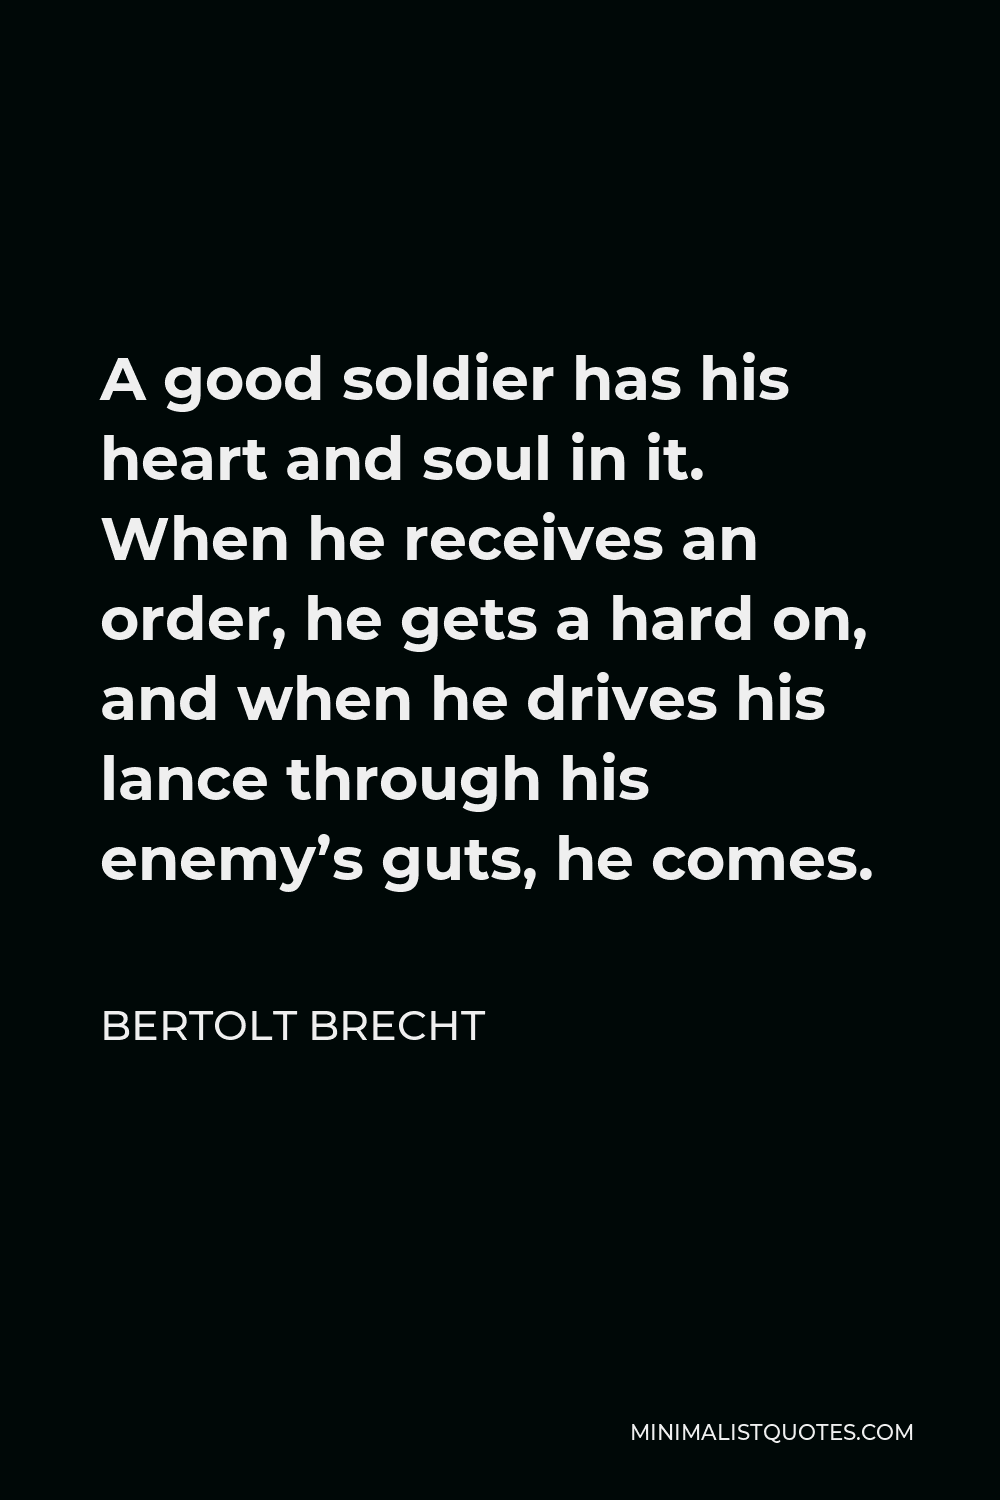 Bertolt Brecht Quote - A good soldier has his heart and soul in it. When he receives an order, he gets a hard on, and when he drives his lance through his enemy’s guts, he comes.